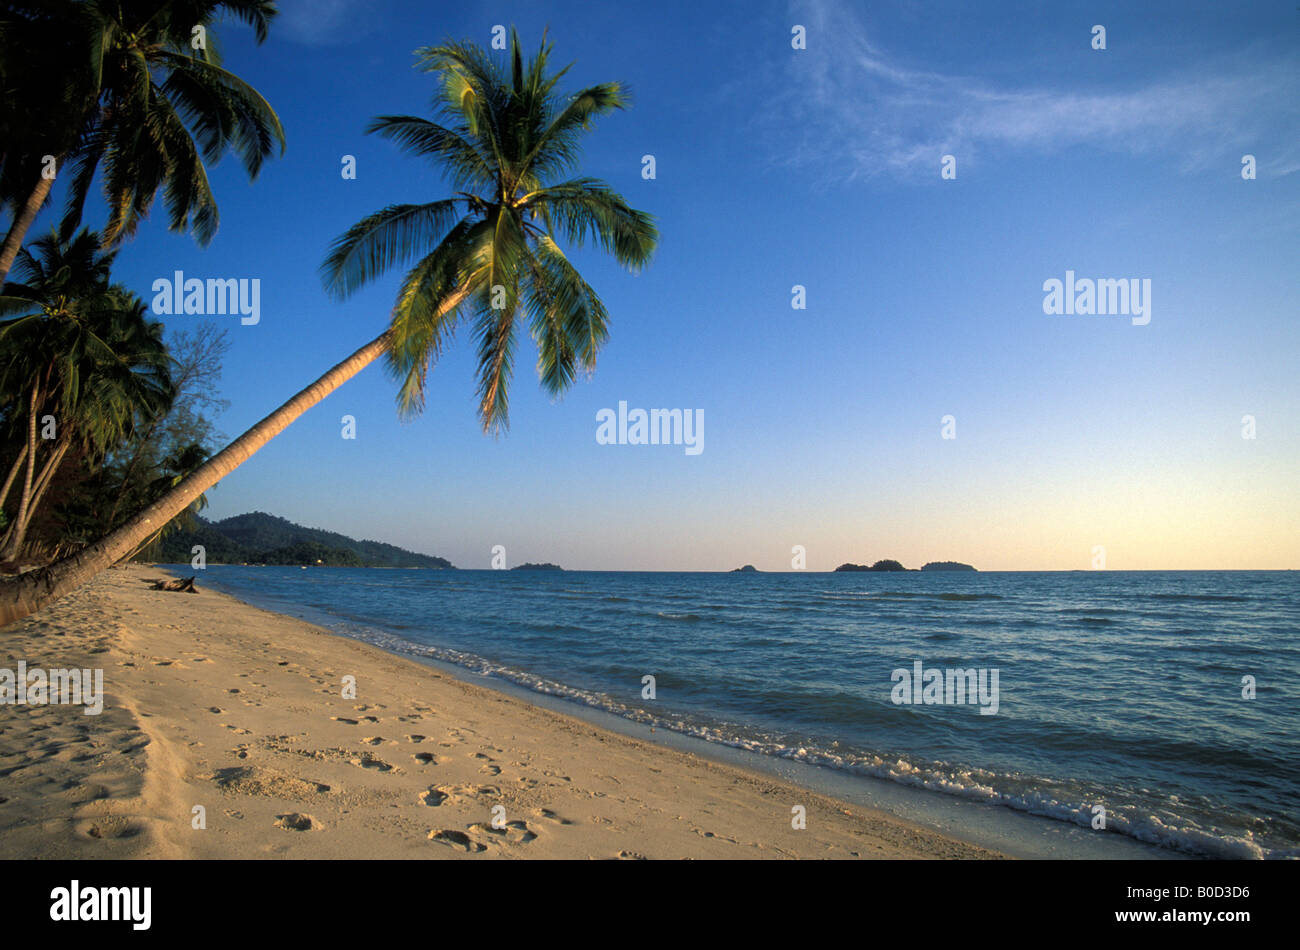 The unspoilt beach of Ko Chang Island Stock Photo